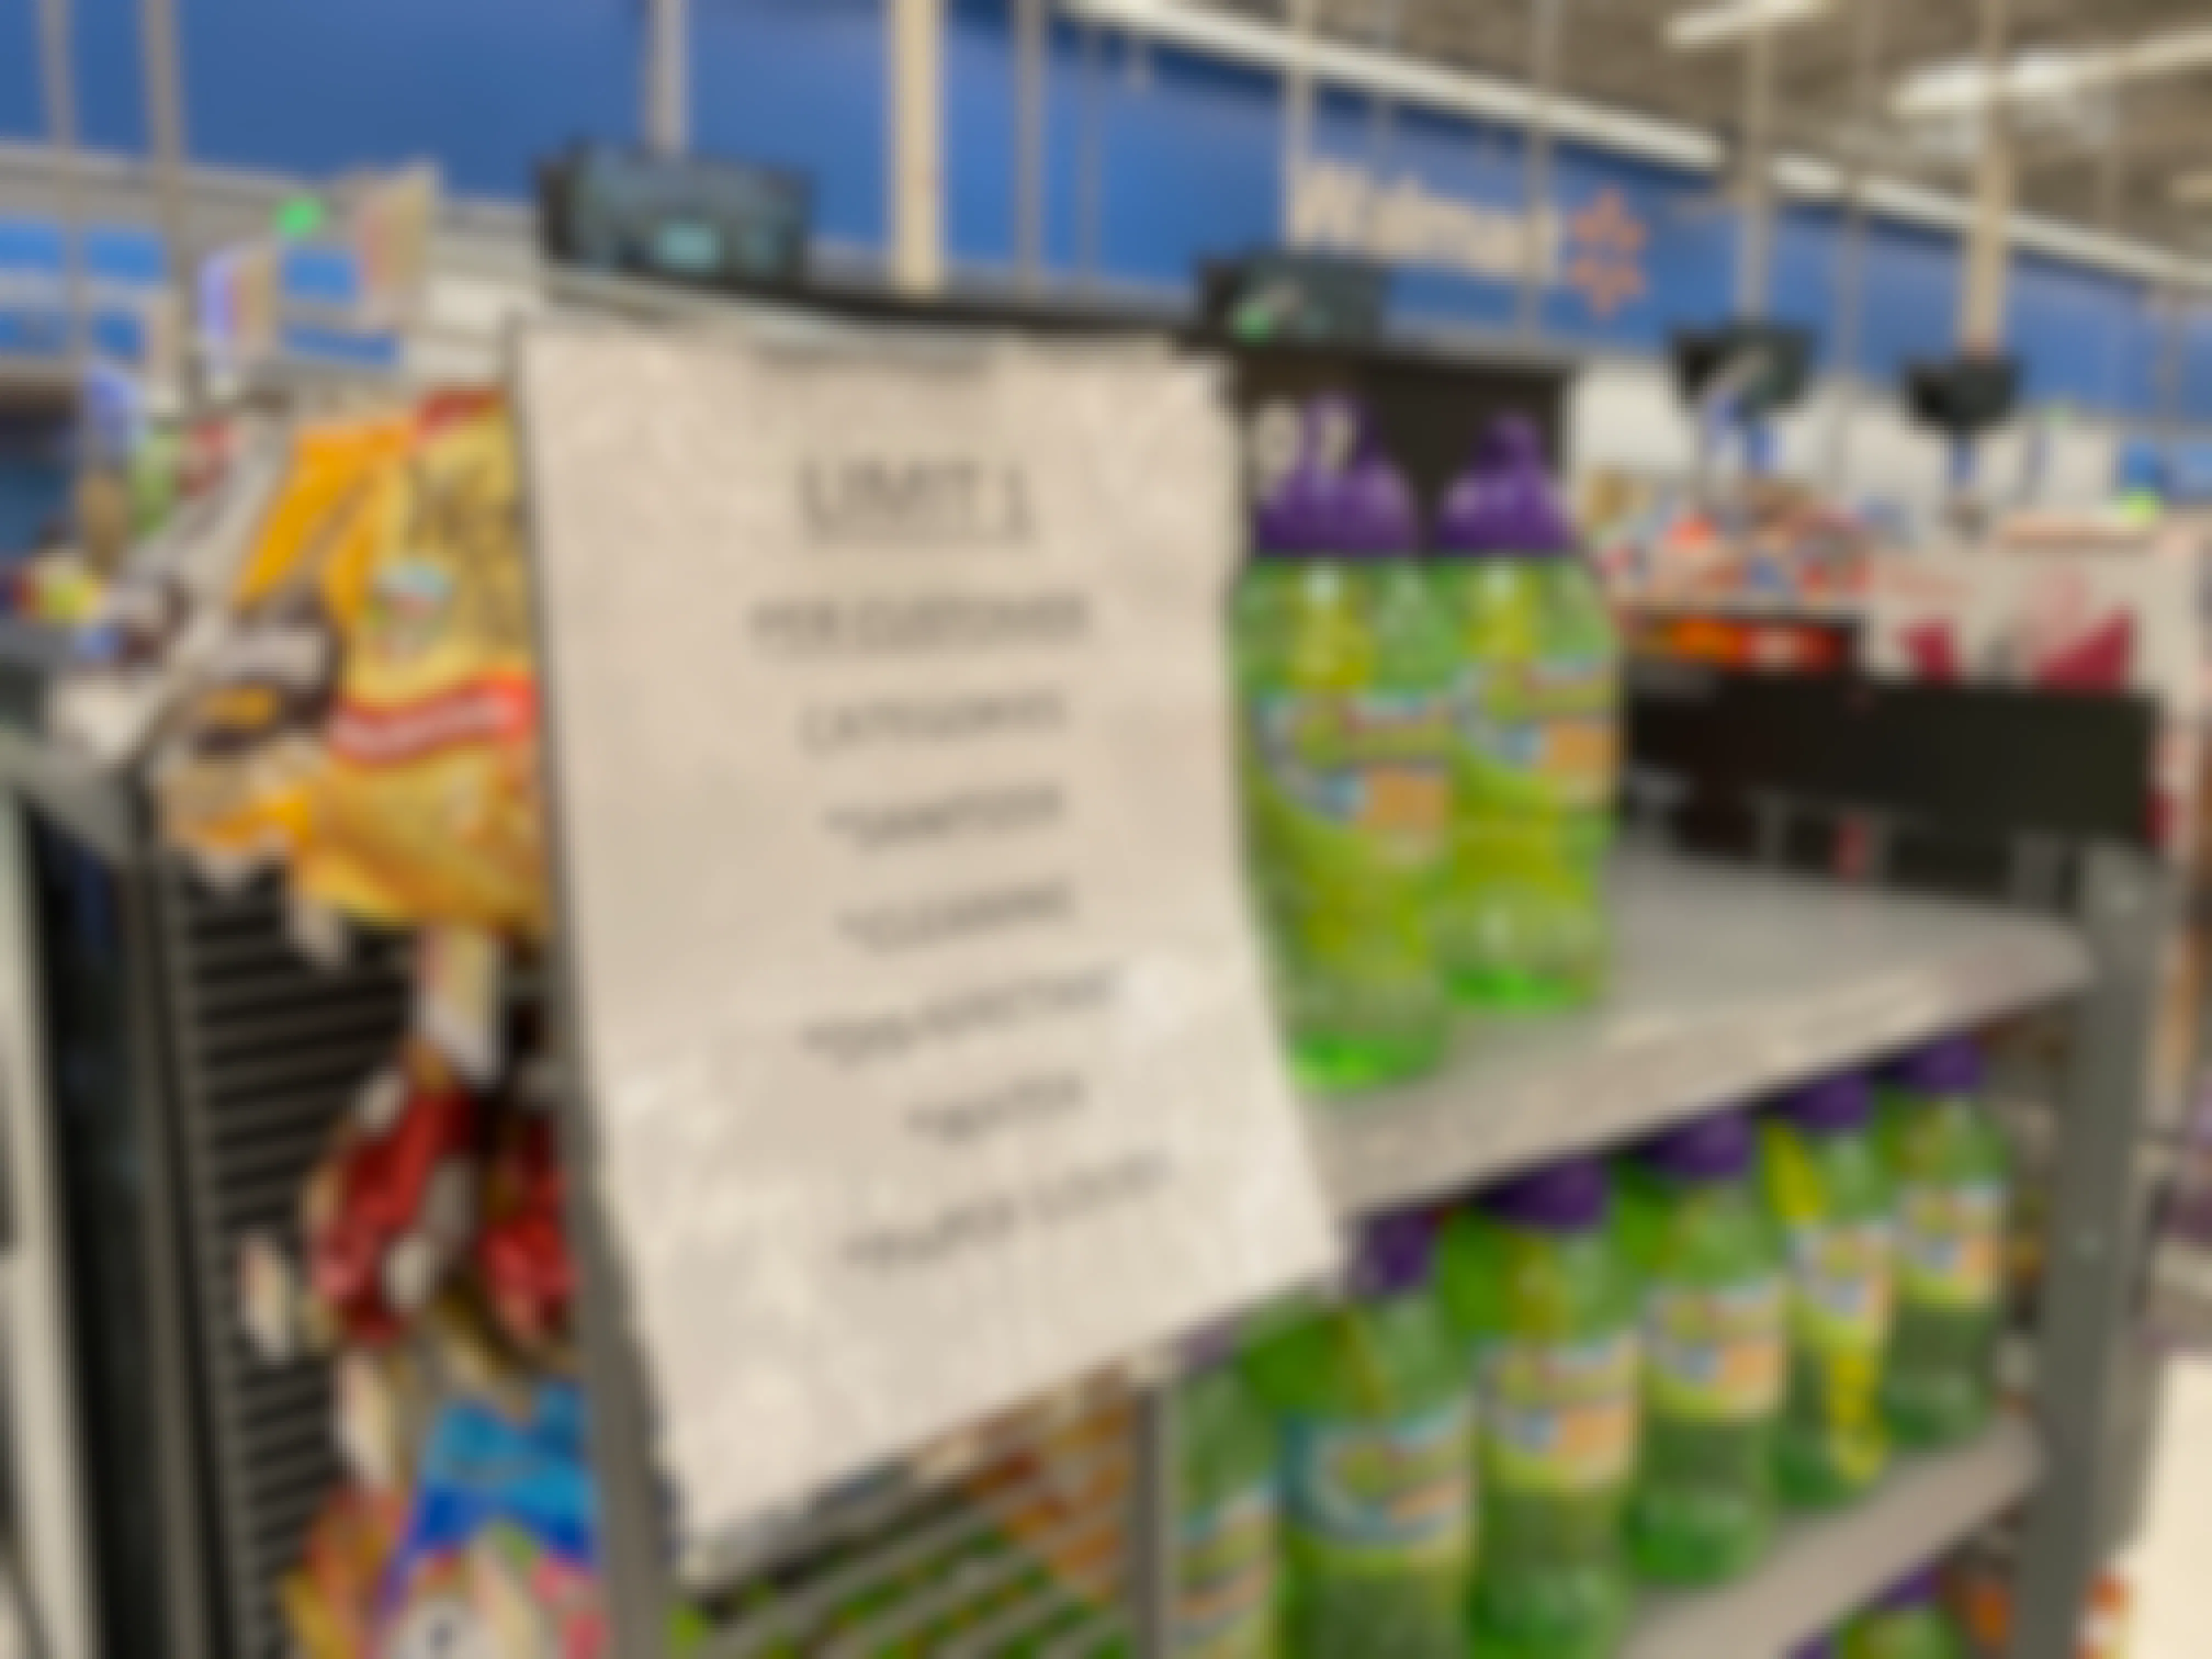 A sign inside Walmart with a list of items that are limited, 1 per customer.